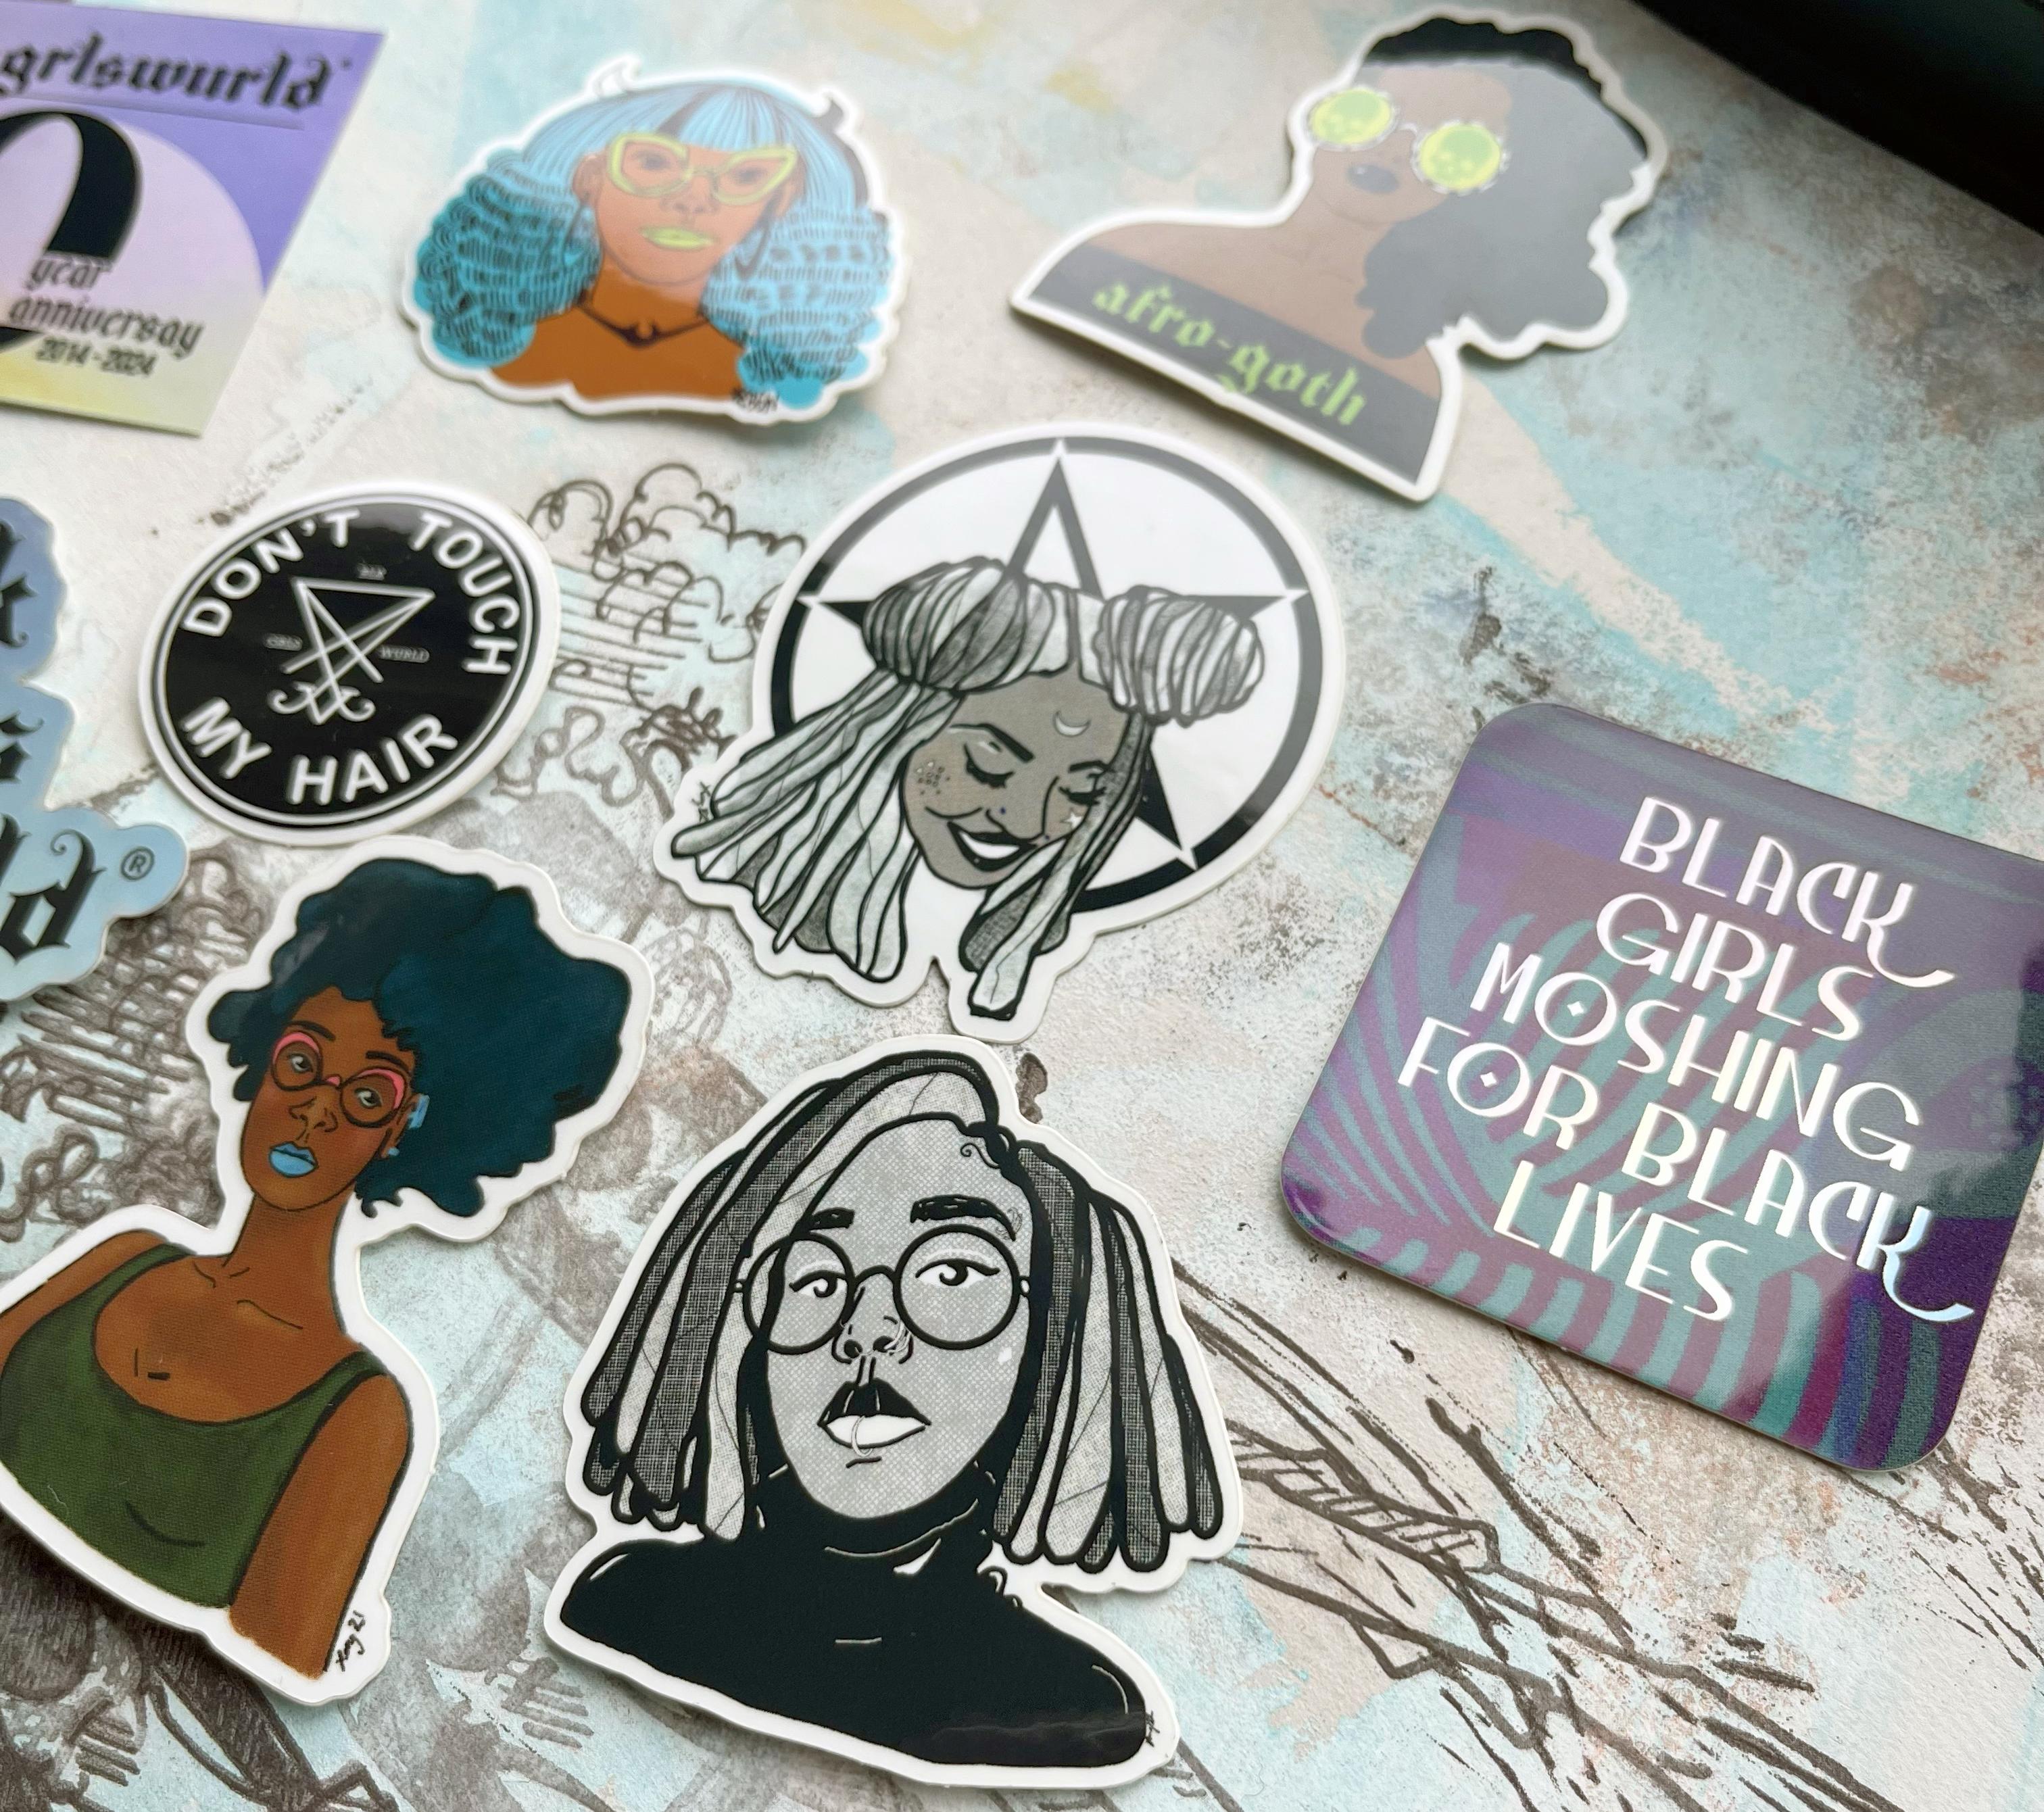 A variety of stickers laid out on top of an illustration